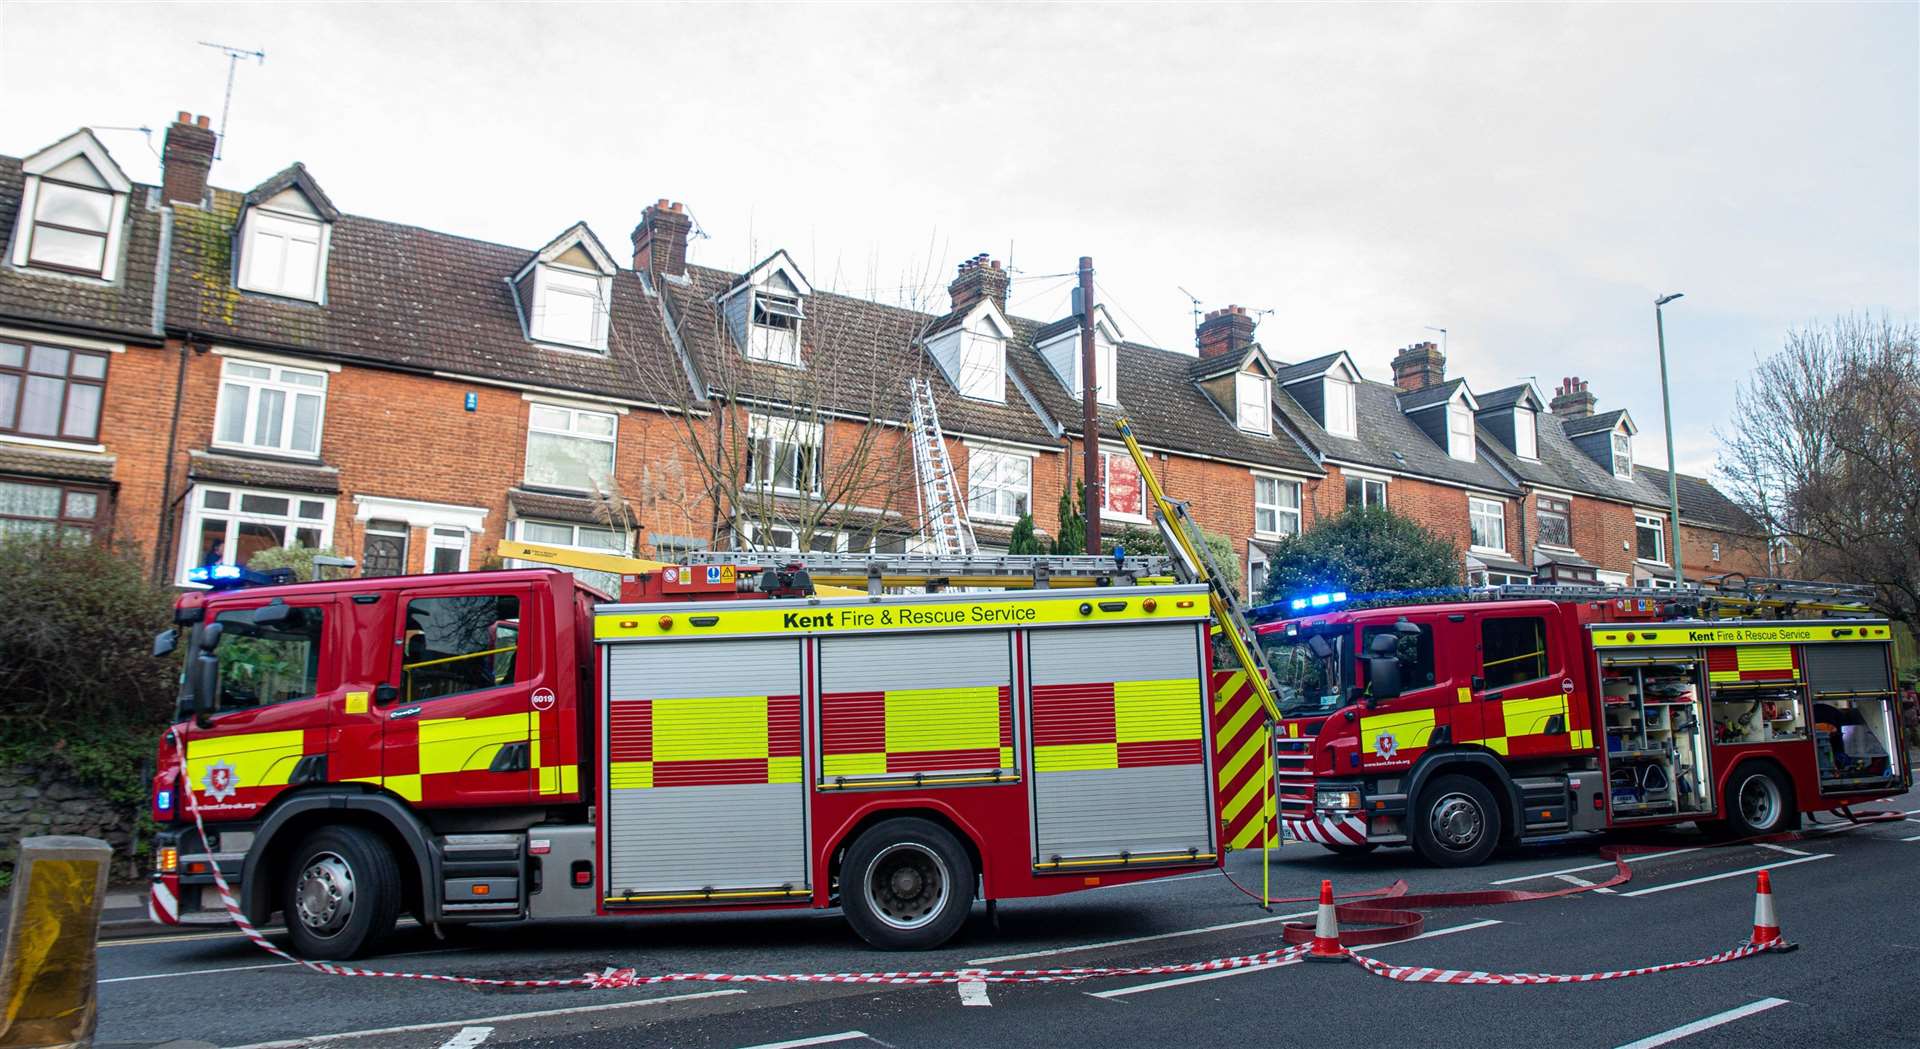 Firefighters attended the incident at Loose Road, Maidstone